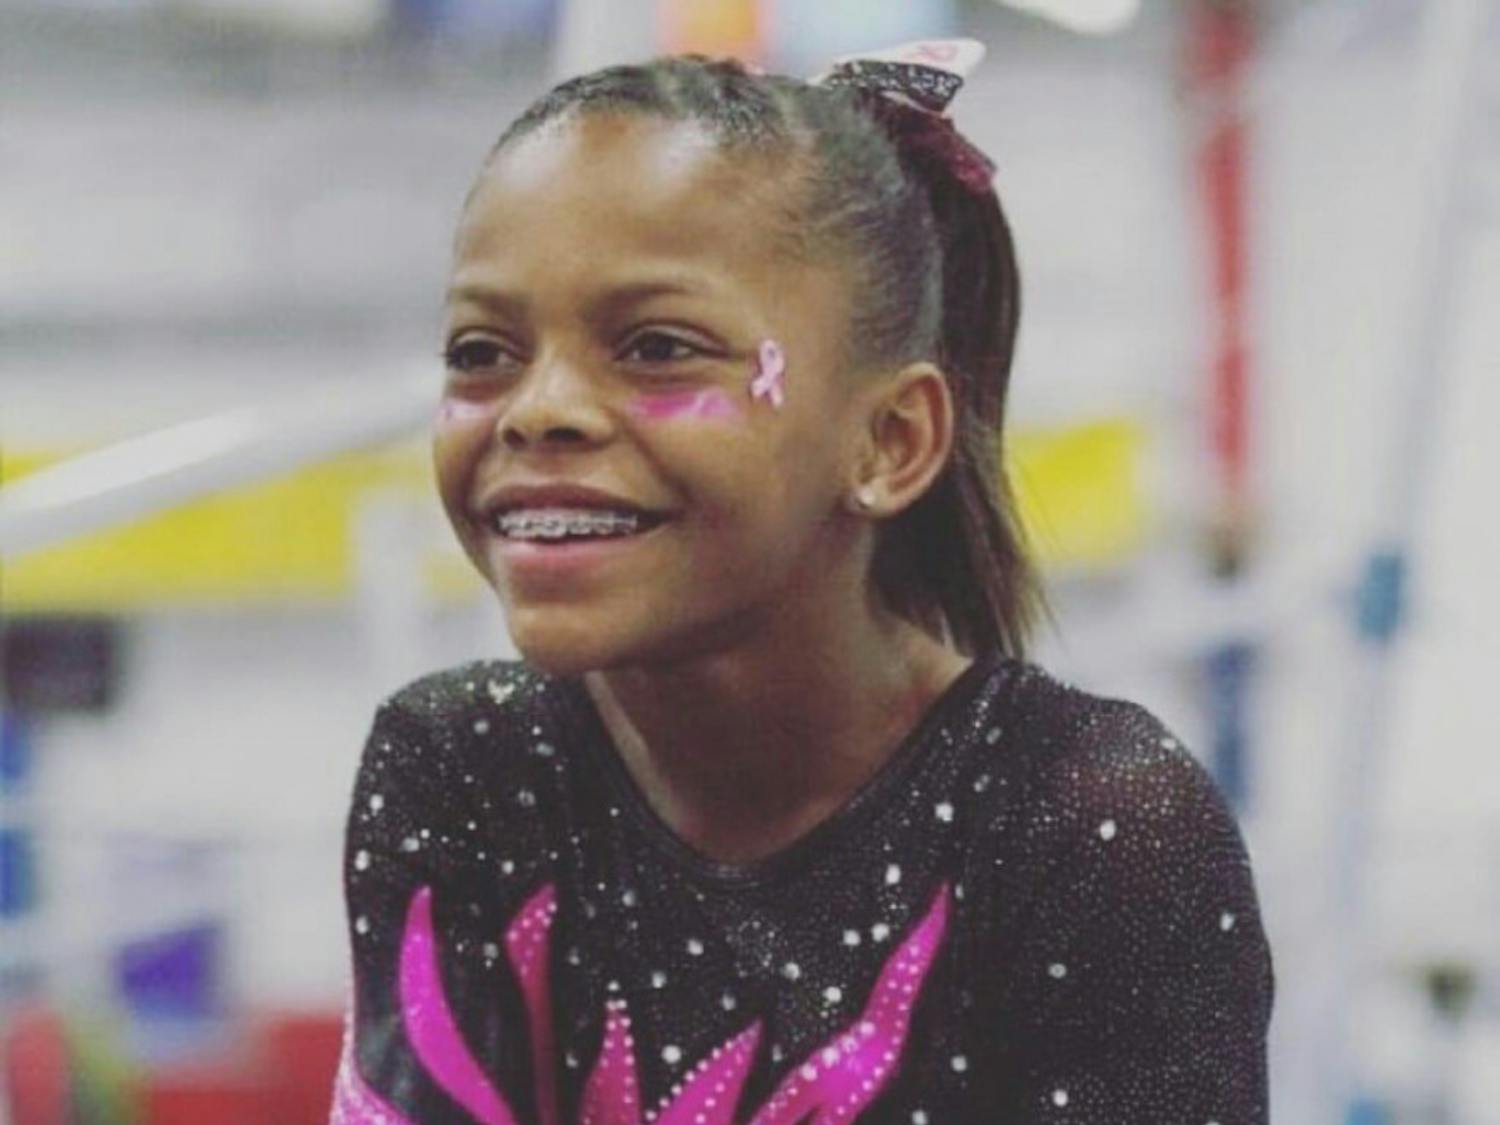 Trinity began gymnastics when she was eight, which many consider a late start in the sport.